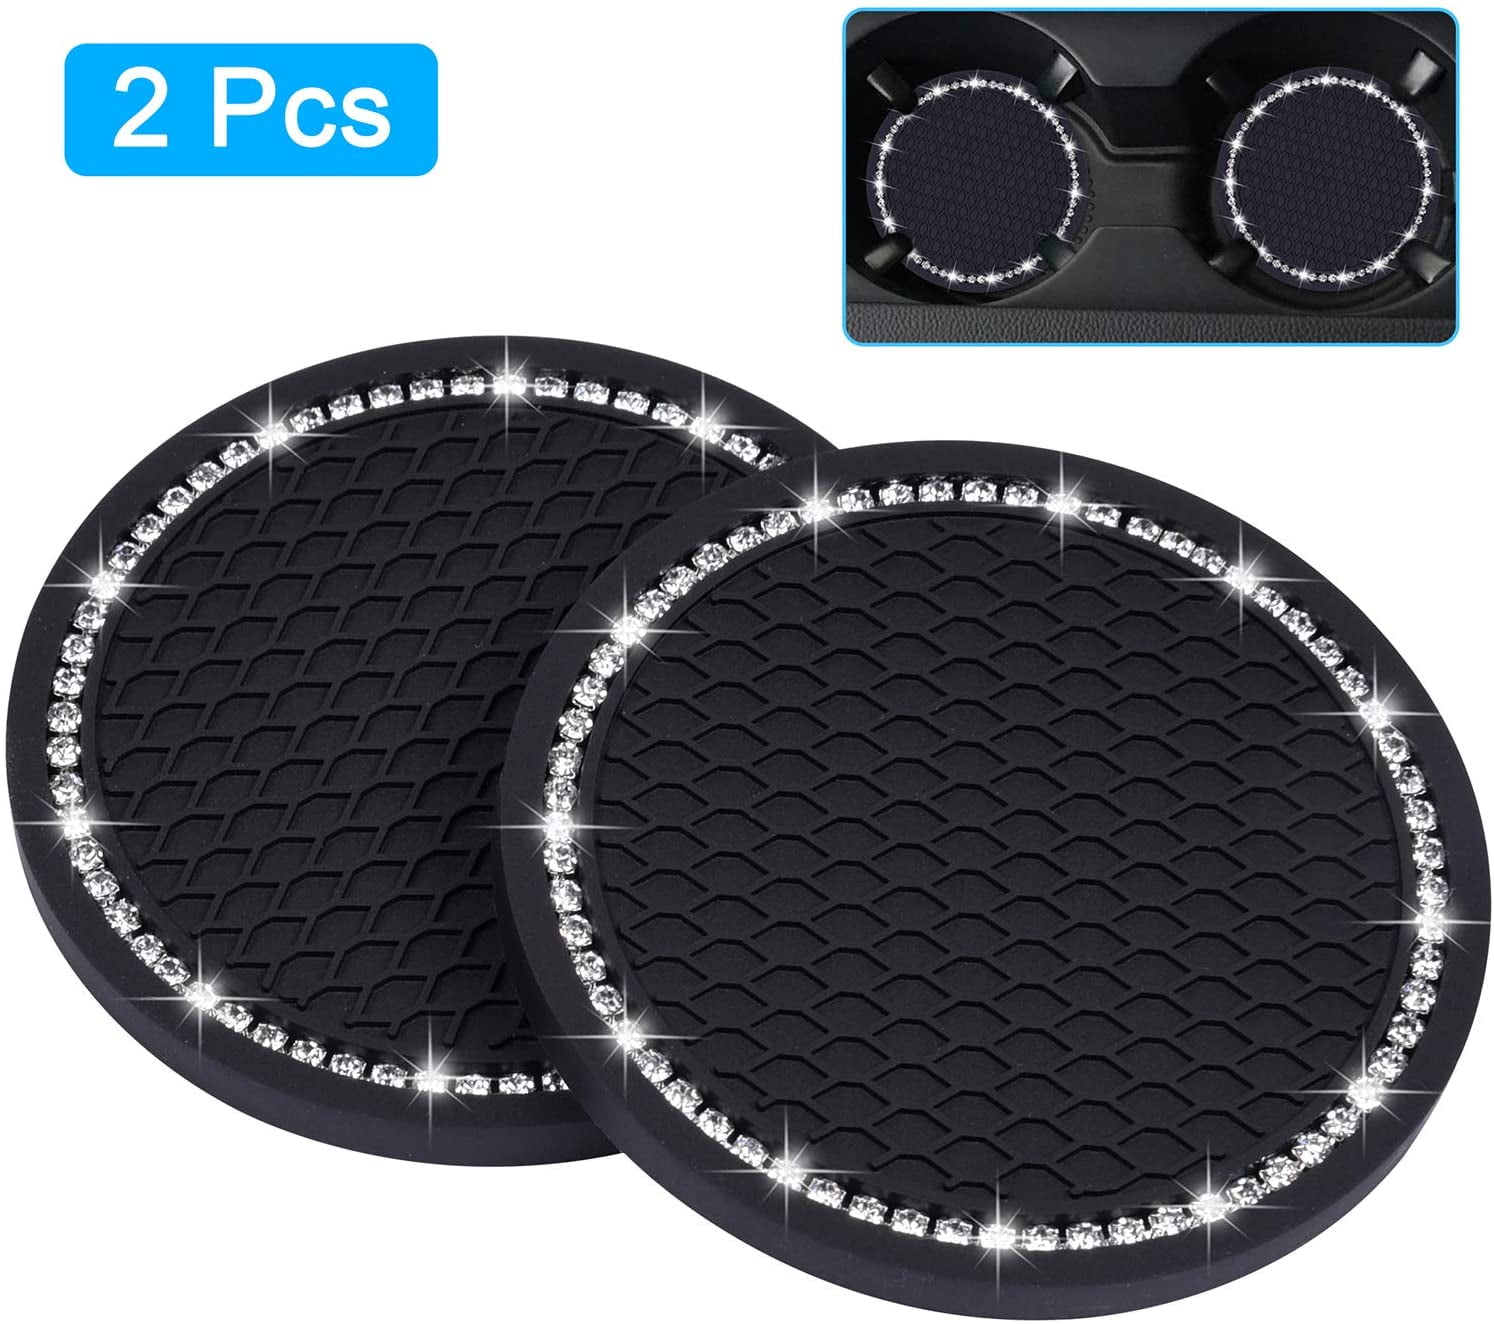 Black Car Coasters Anti Slip Car Cup Holder 2.75 inch Universal Bling Coasters for Cup Holders Cute Car Accessories for Women and Girl 2 PCS 